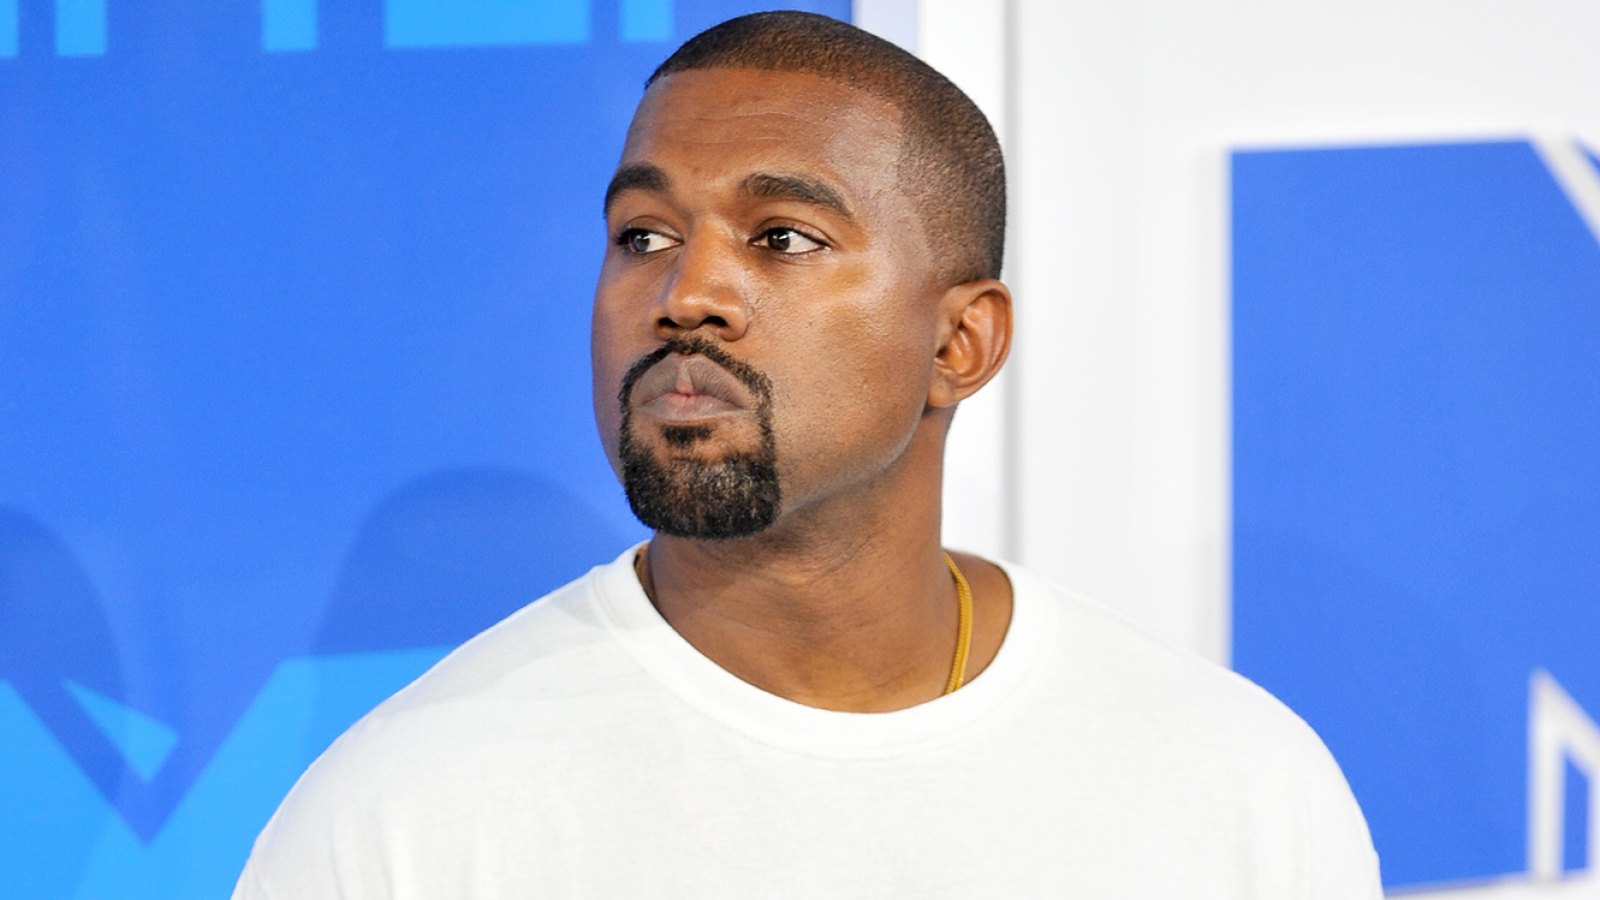 Kanye West ‘Got Really Heated’ Talking About Elon Musk During Surprise Visit to Michigan Art School